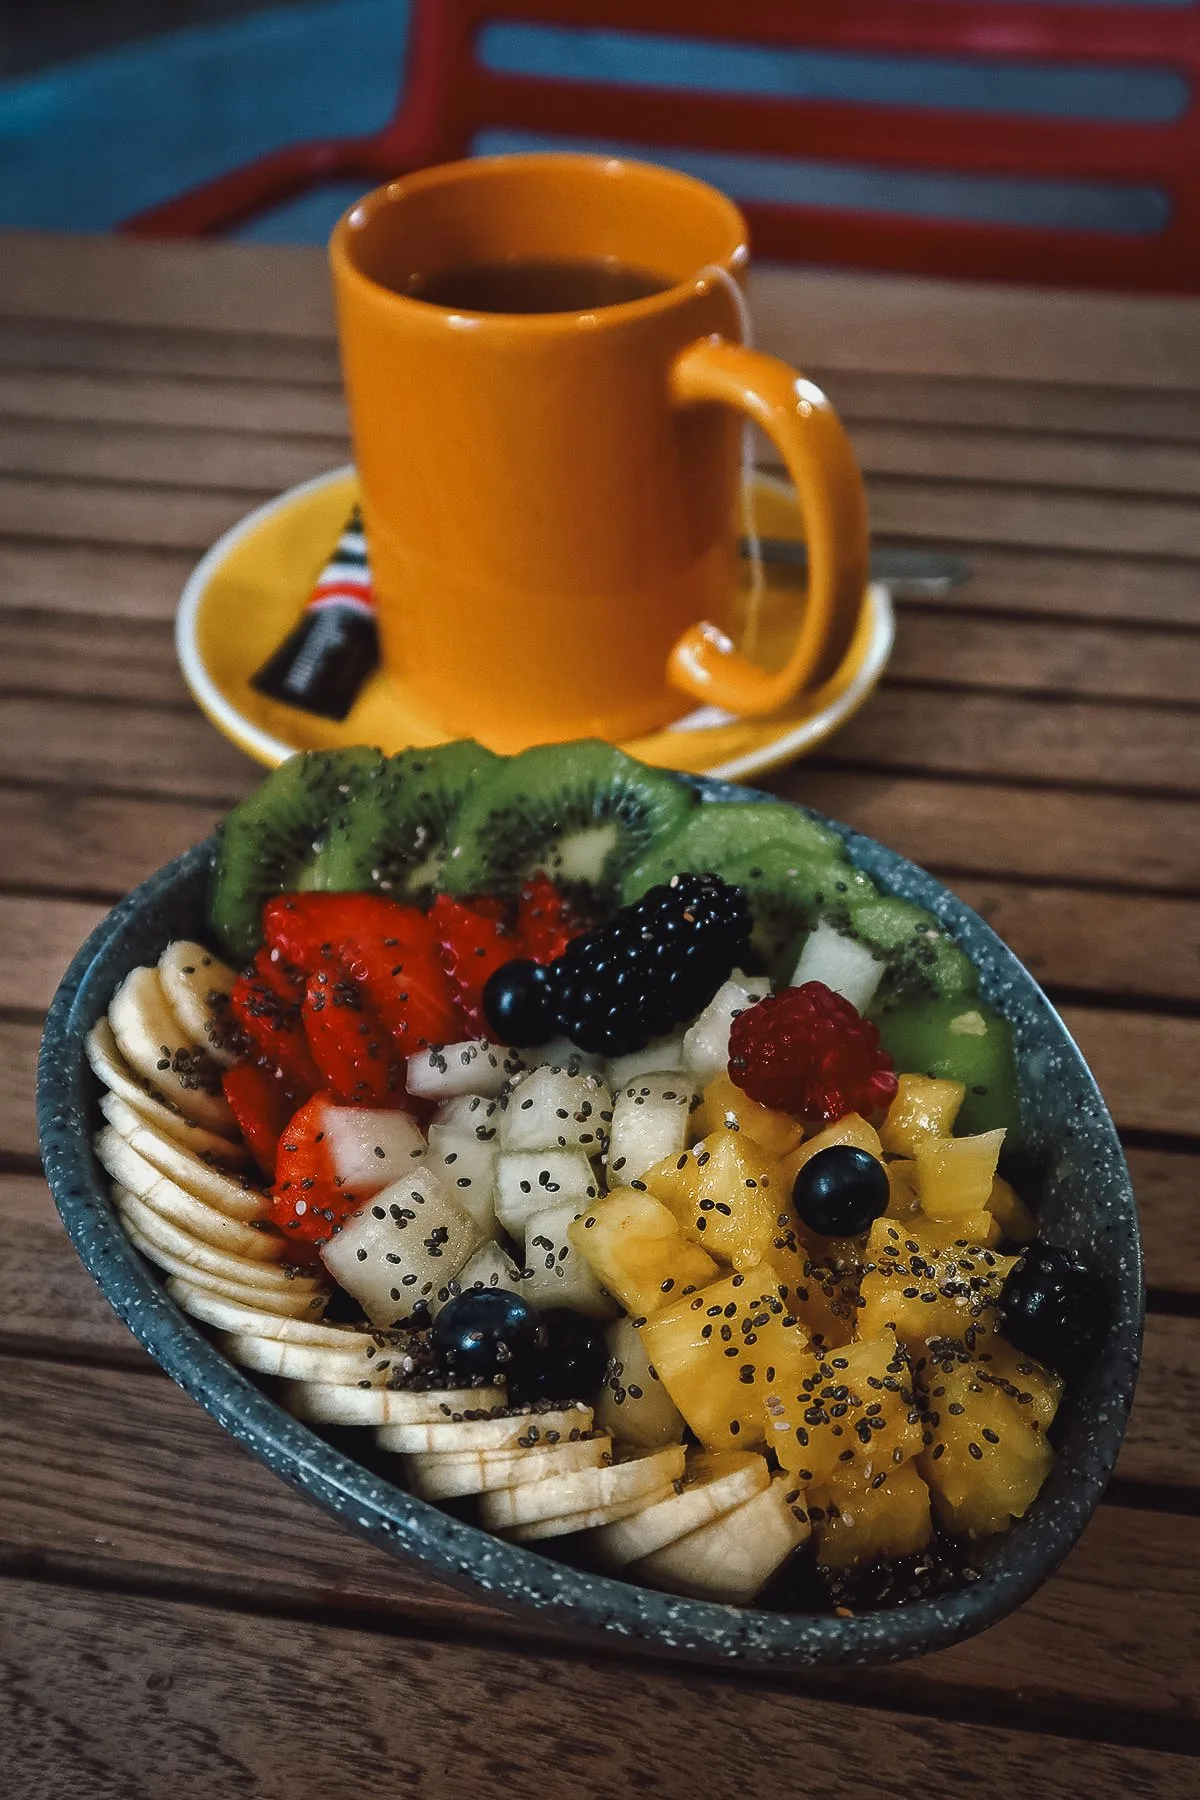 Acai bowl at a restaurant in Seville